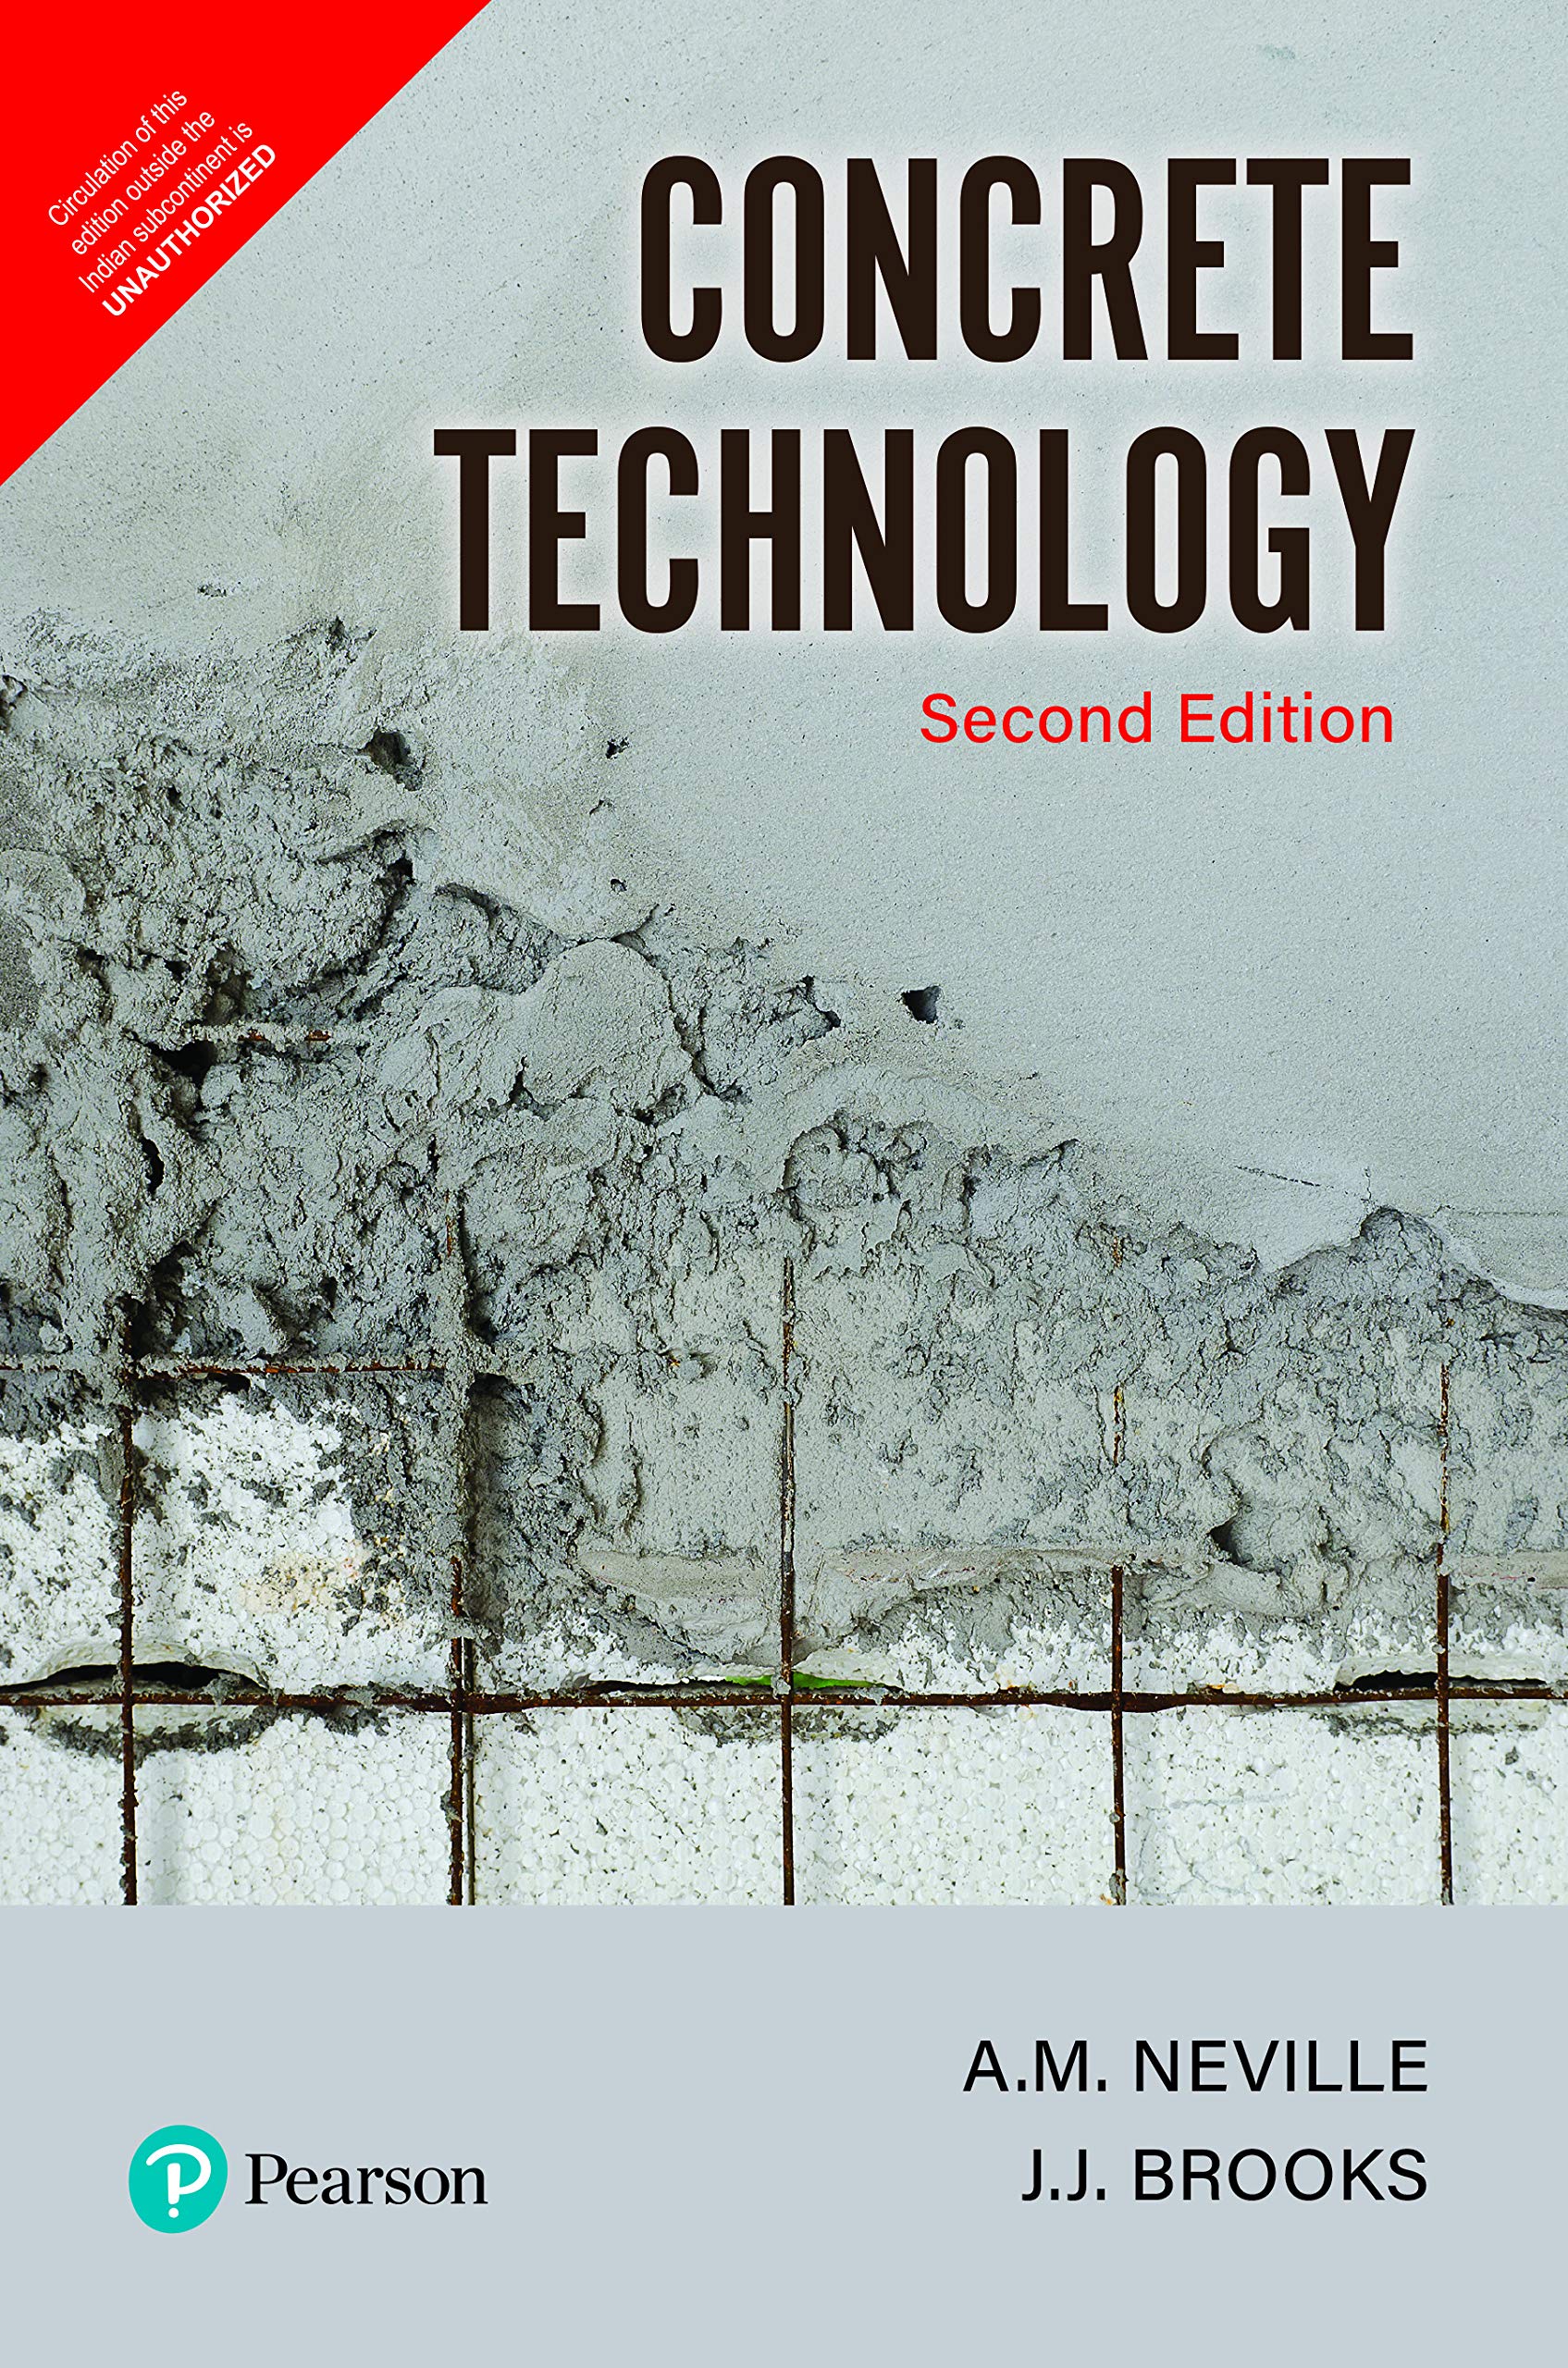 research papers on concrete technology